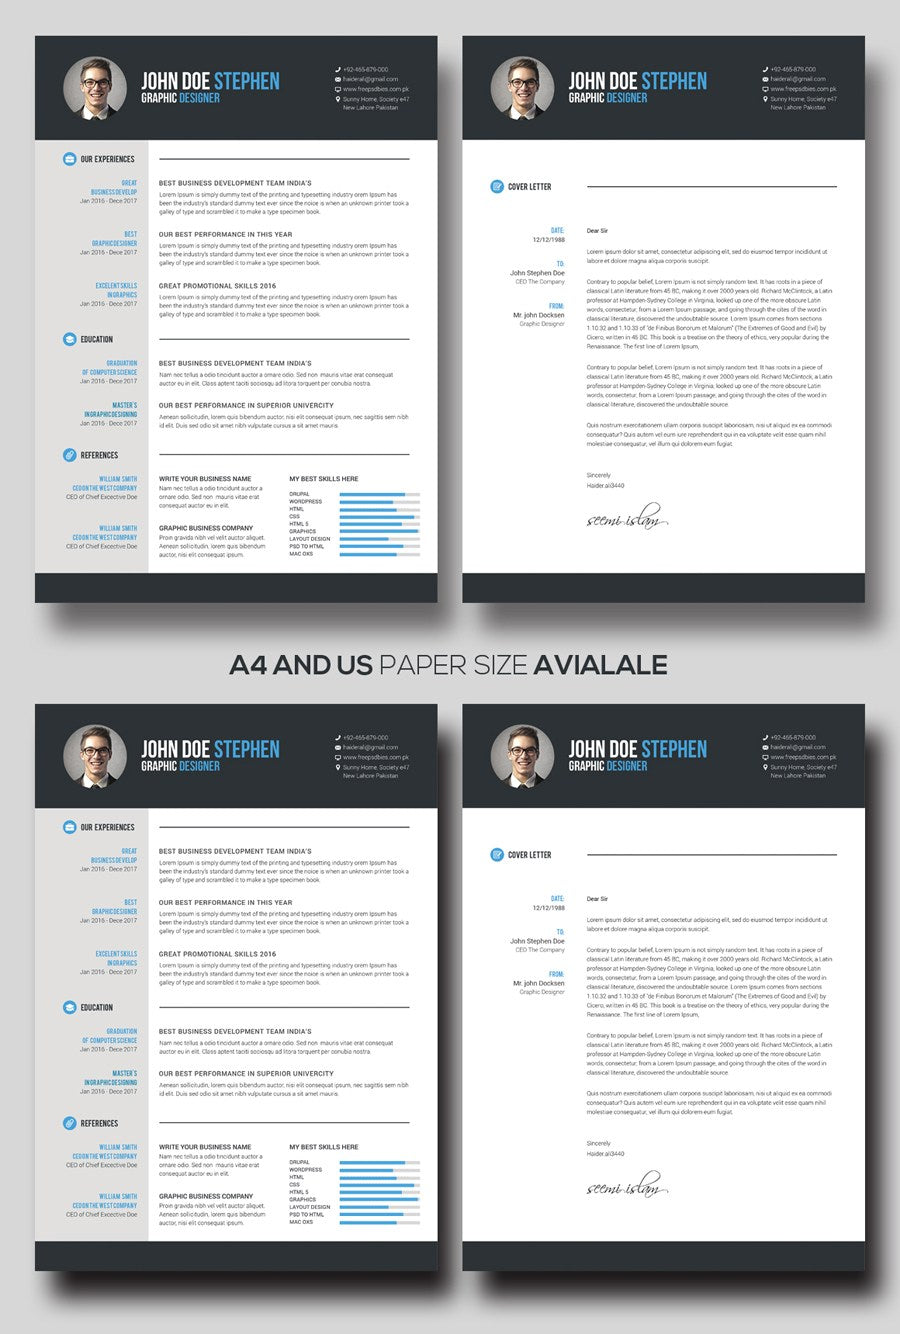 Free Microsoft Word Resume and CV Template for Photoshop (PSD) and Illustrator (AI) Formats Also